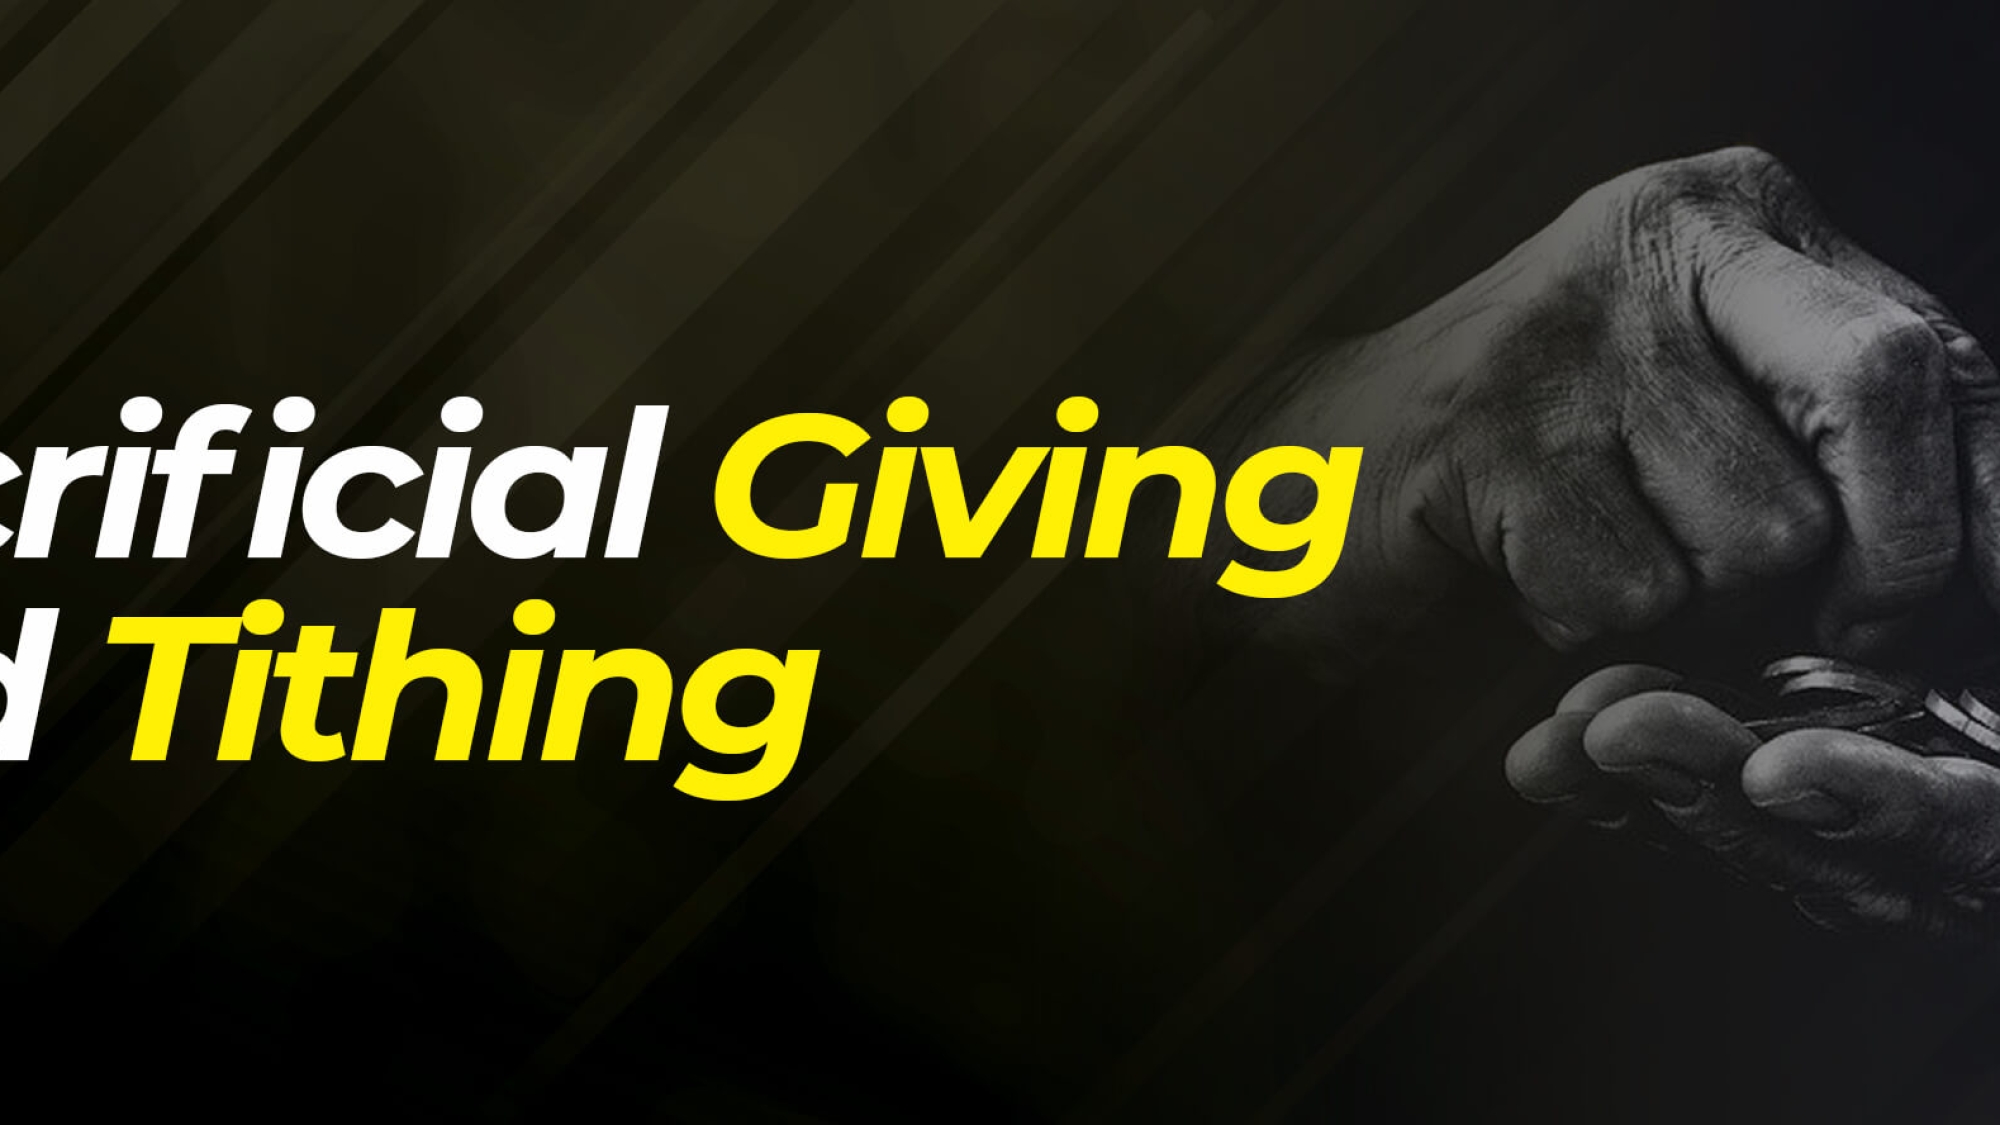 Sacrificial Giving And Tithing